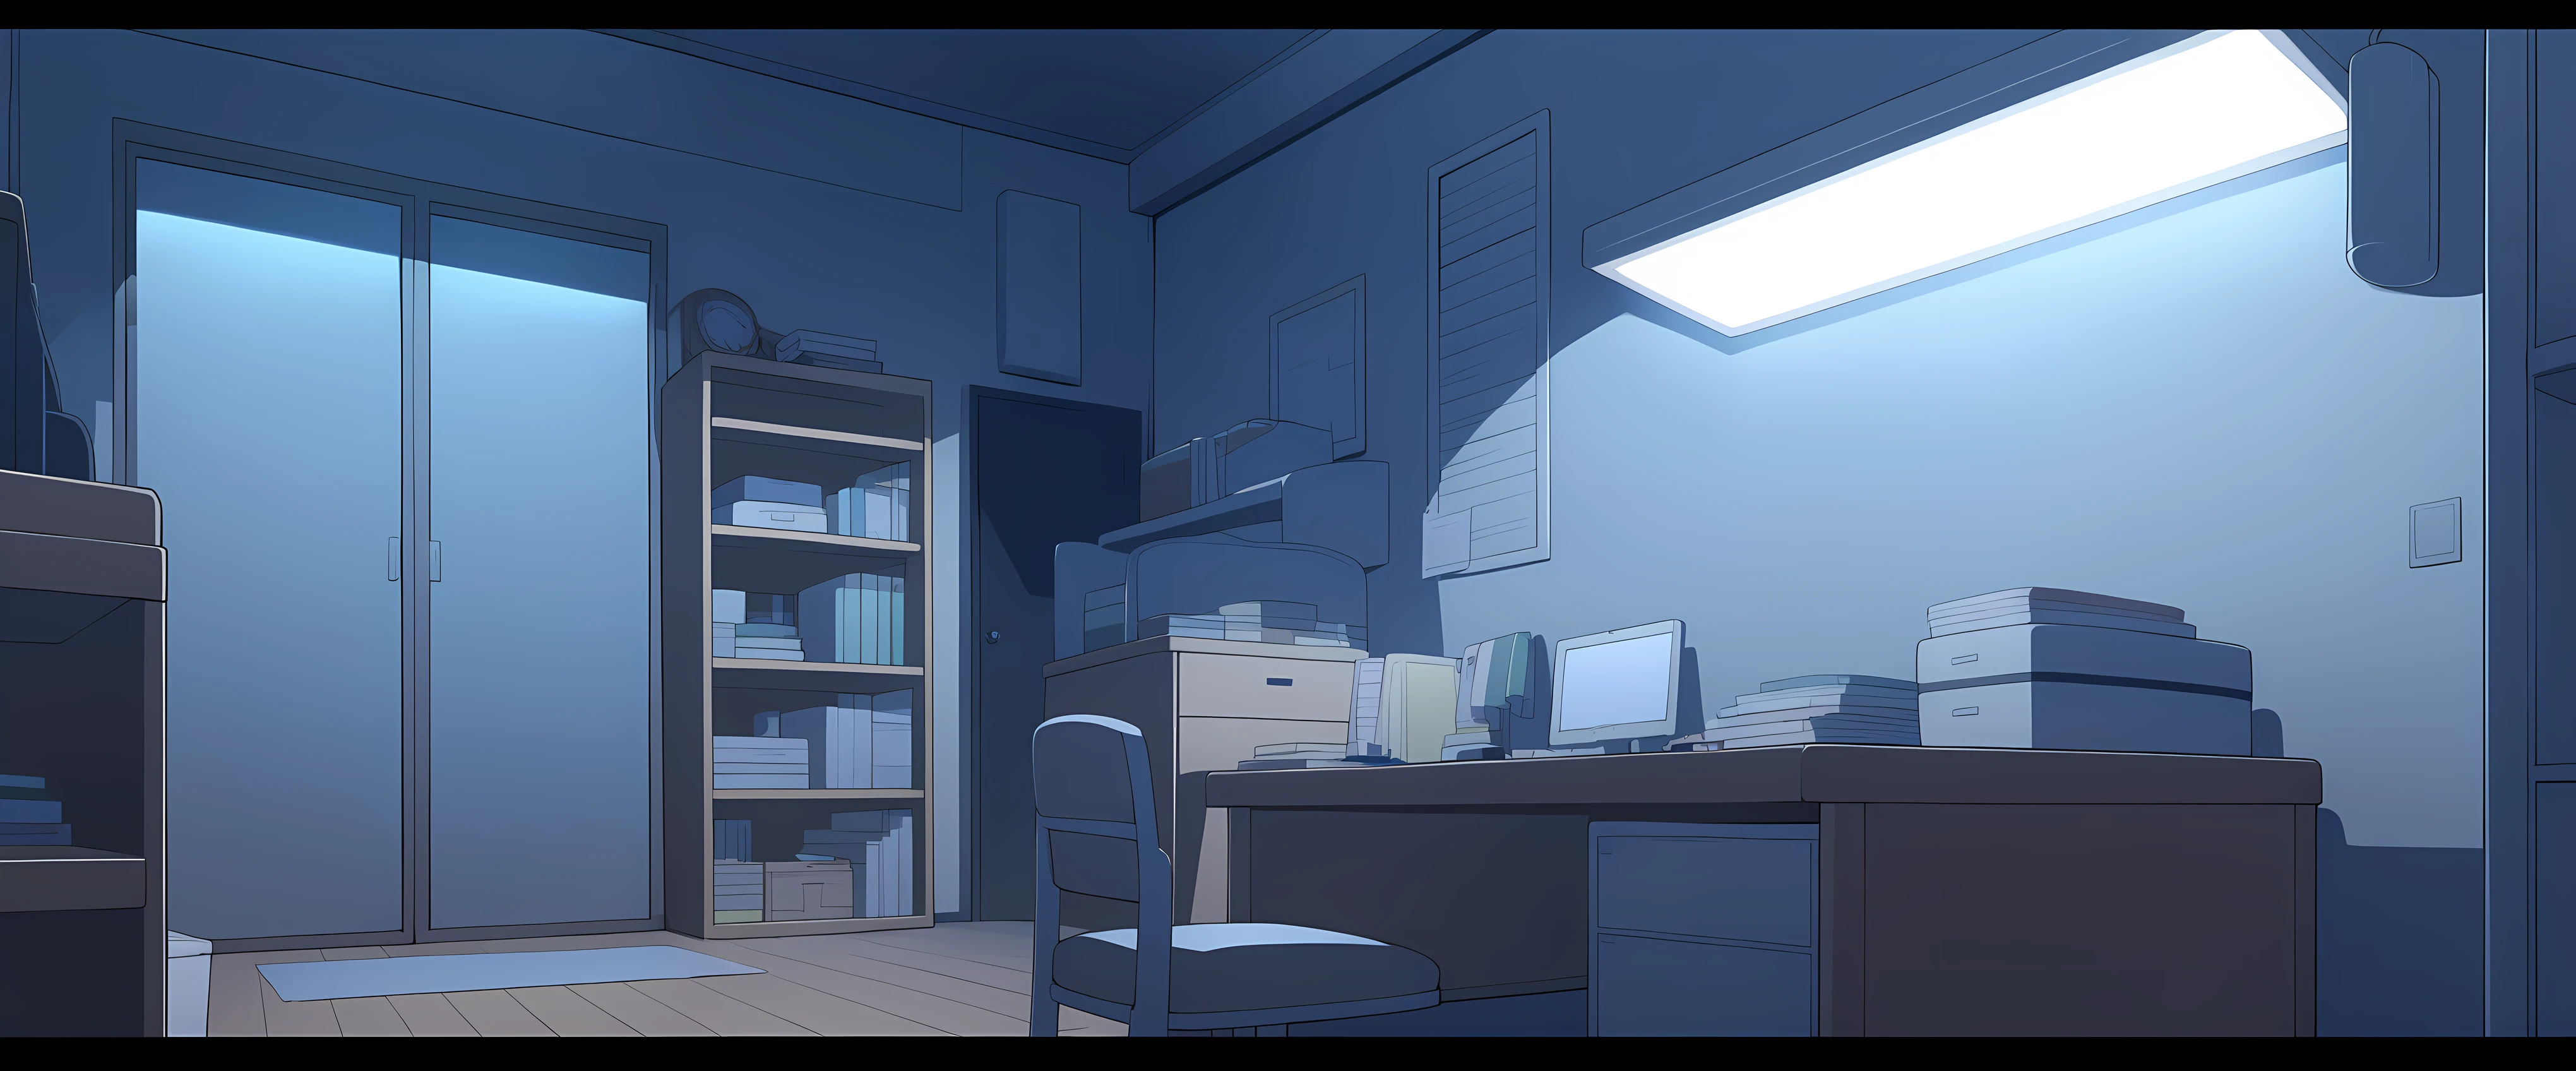 Dimly lit room with fluorescent light from a desk, light yagami's room, anime-style room, study, dark, night, gloomy, bare, cozy
